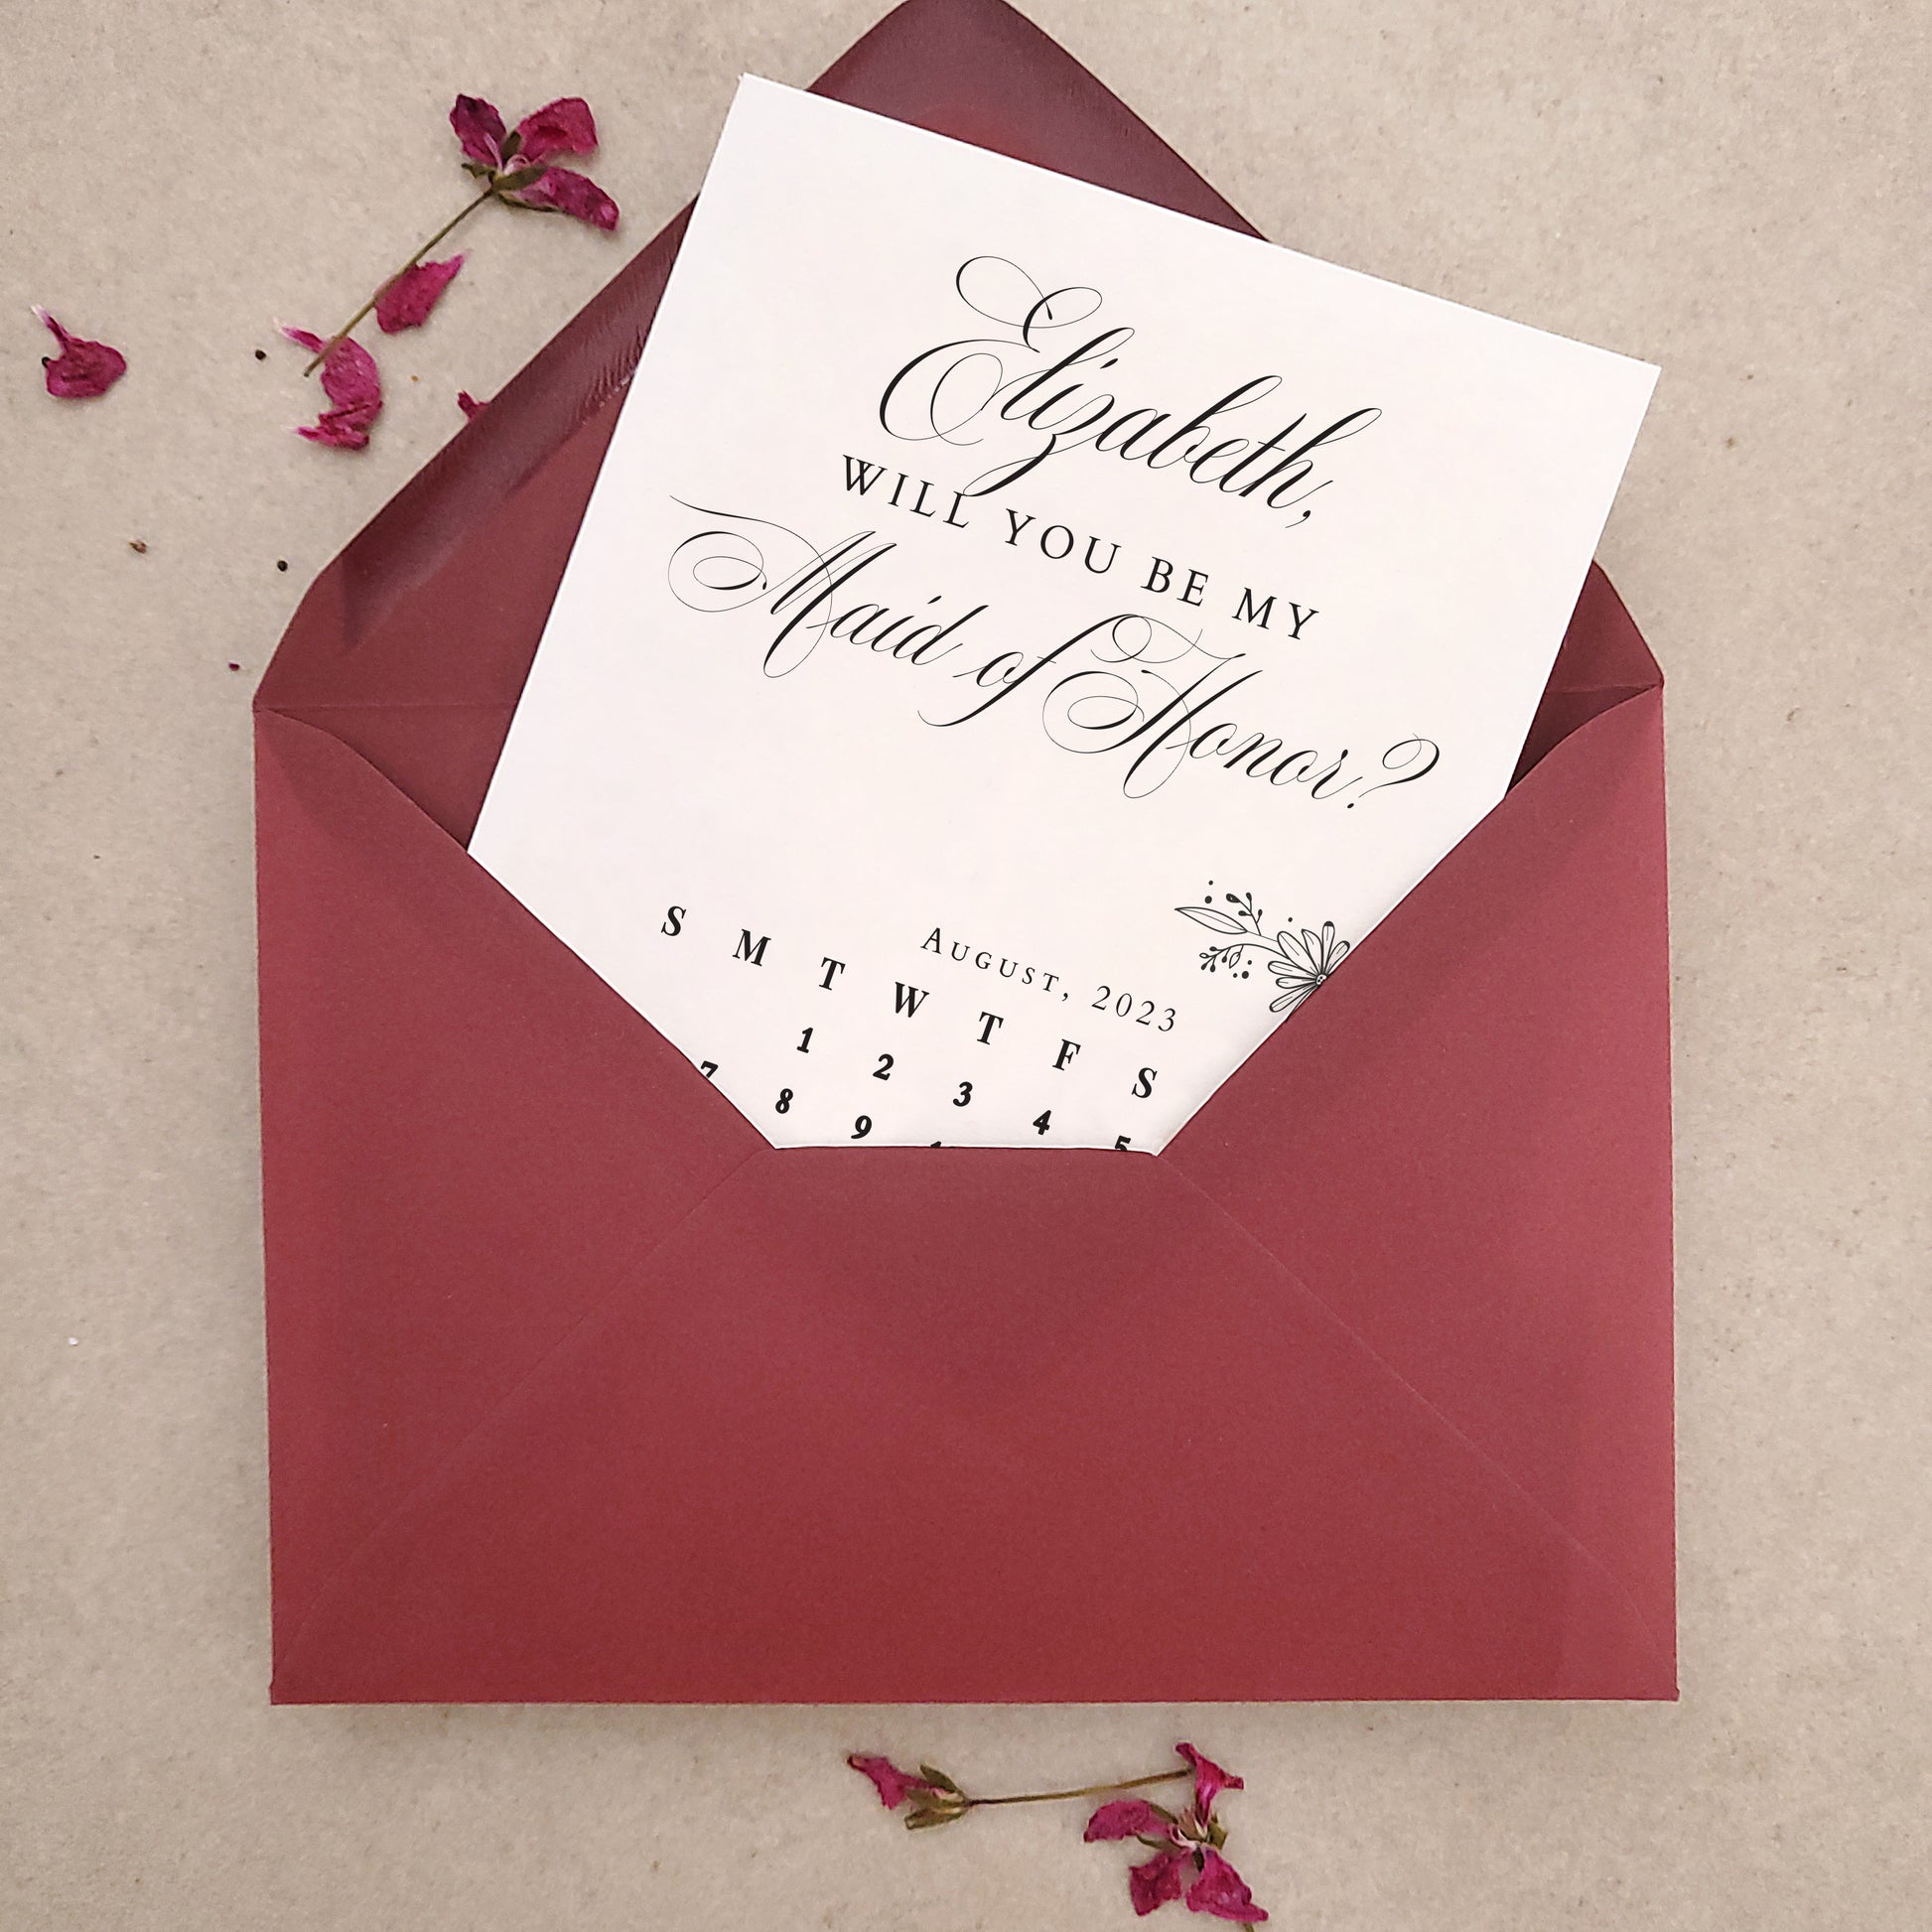 personalized will you be my maid of honor save the date card - XOXOKristen